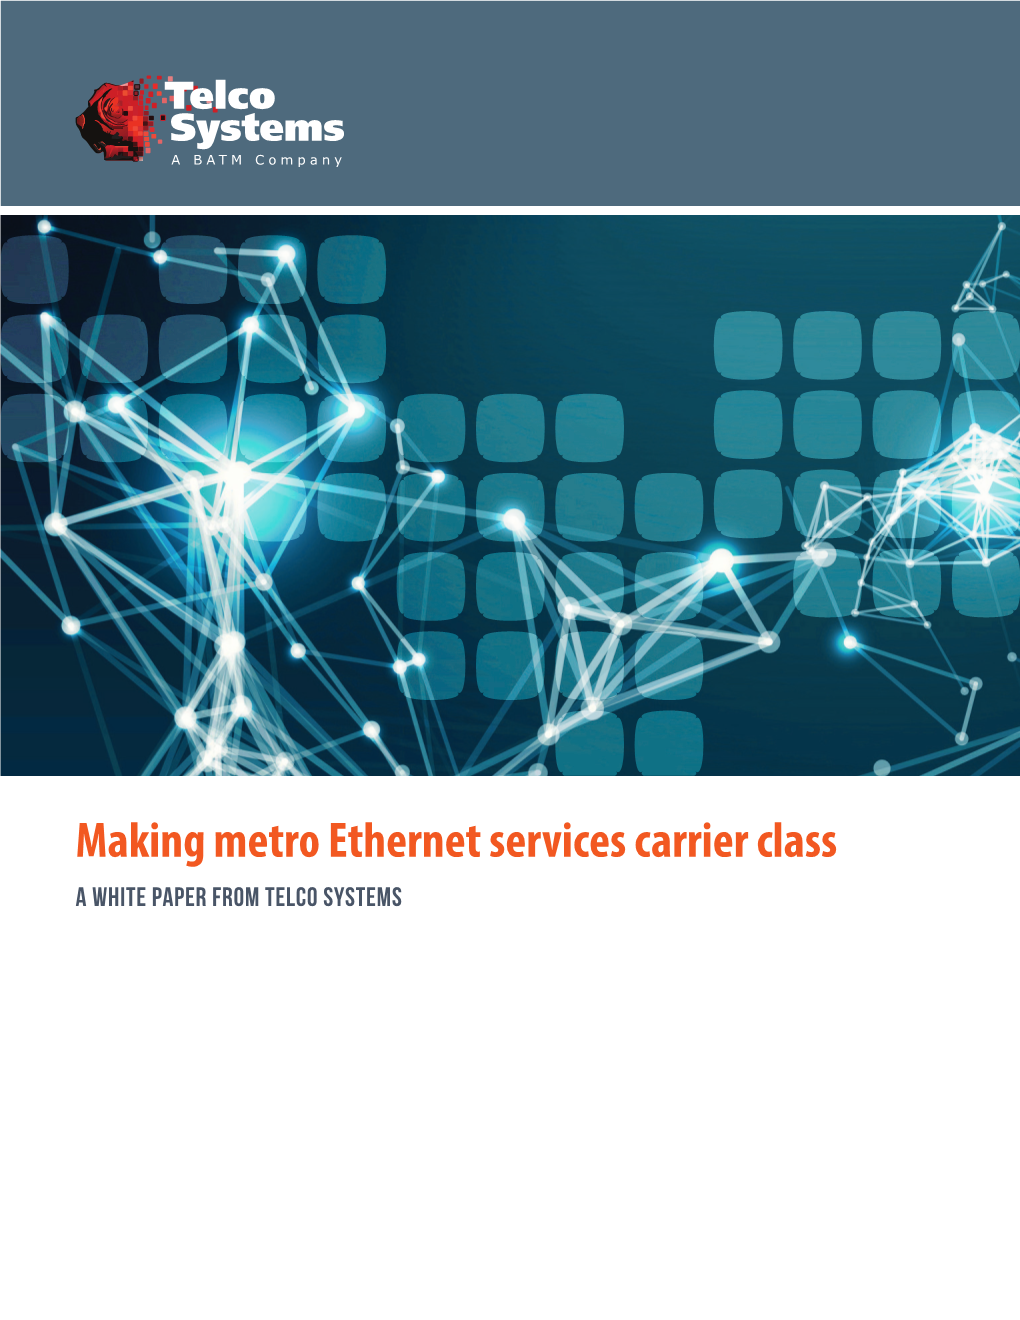 Making Metro Ethernet Services Carrier Class a White Paper from Telco Systems Contents